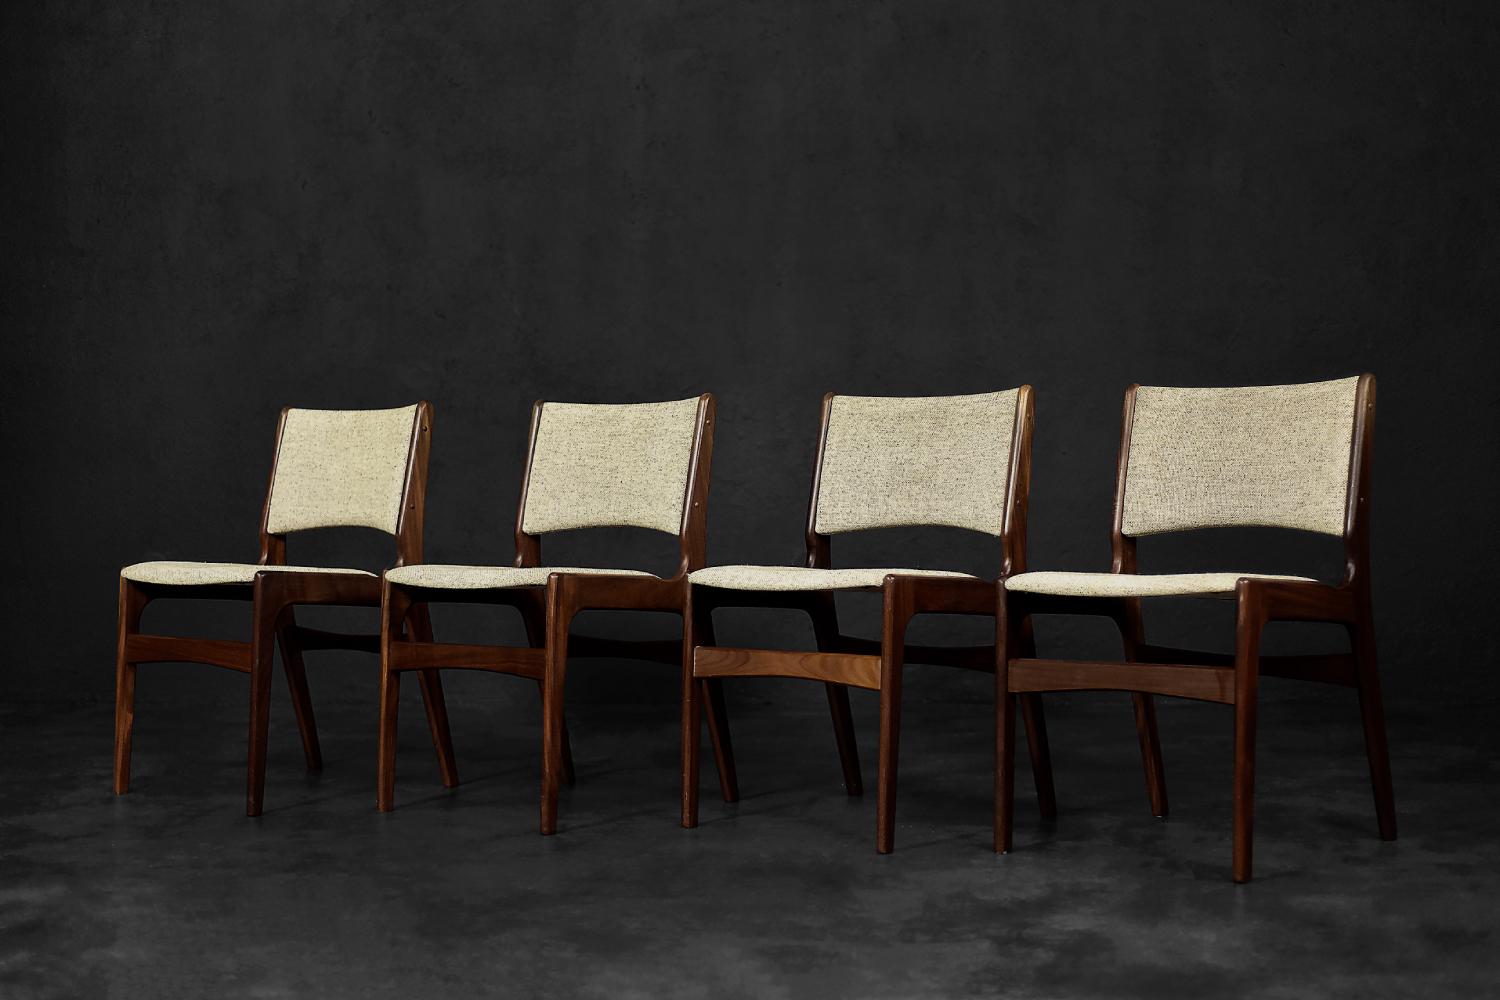 This set of four elegant chairs model 89 was designed by Erik Buch for the Danish manufactory Anderstrup Møbelfabrik during the 1950s. They are made of high-quality teak wood in a dark shade of brown. The profiled, comfortable seat with the backrest